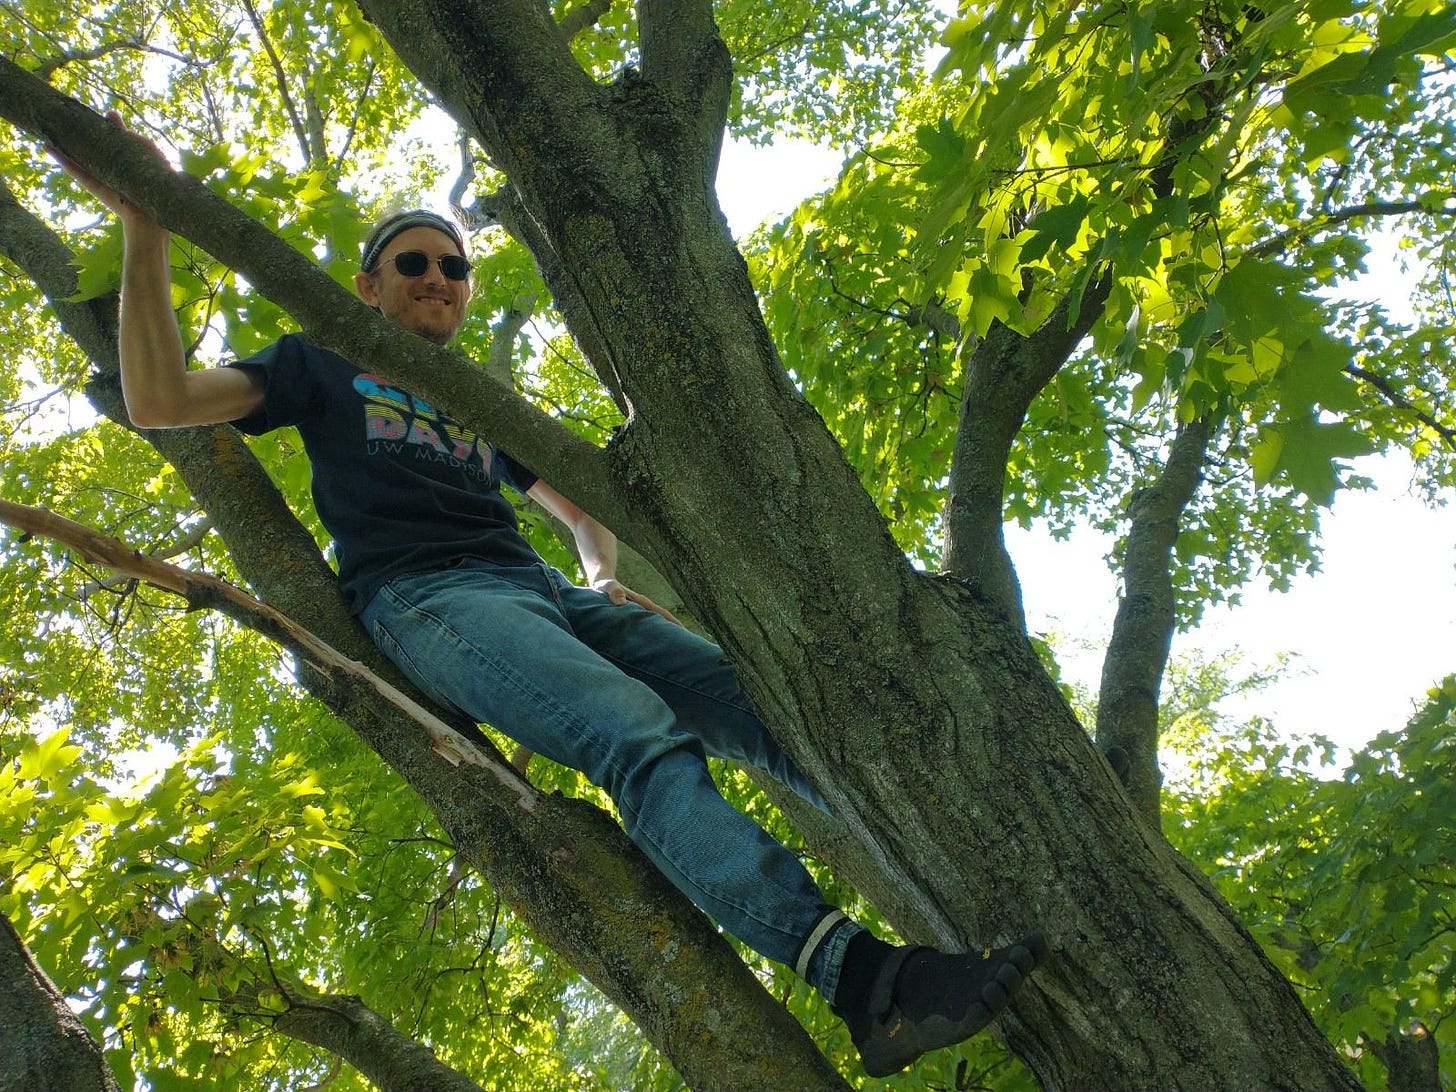 Me, in a tree, smiling.